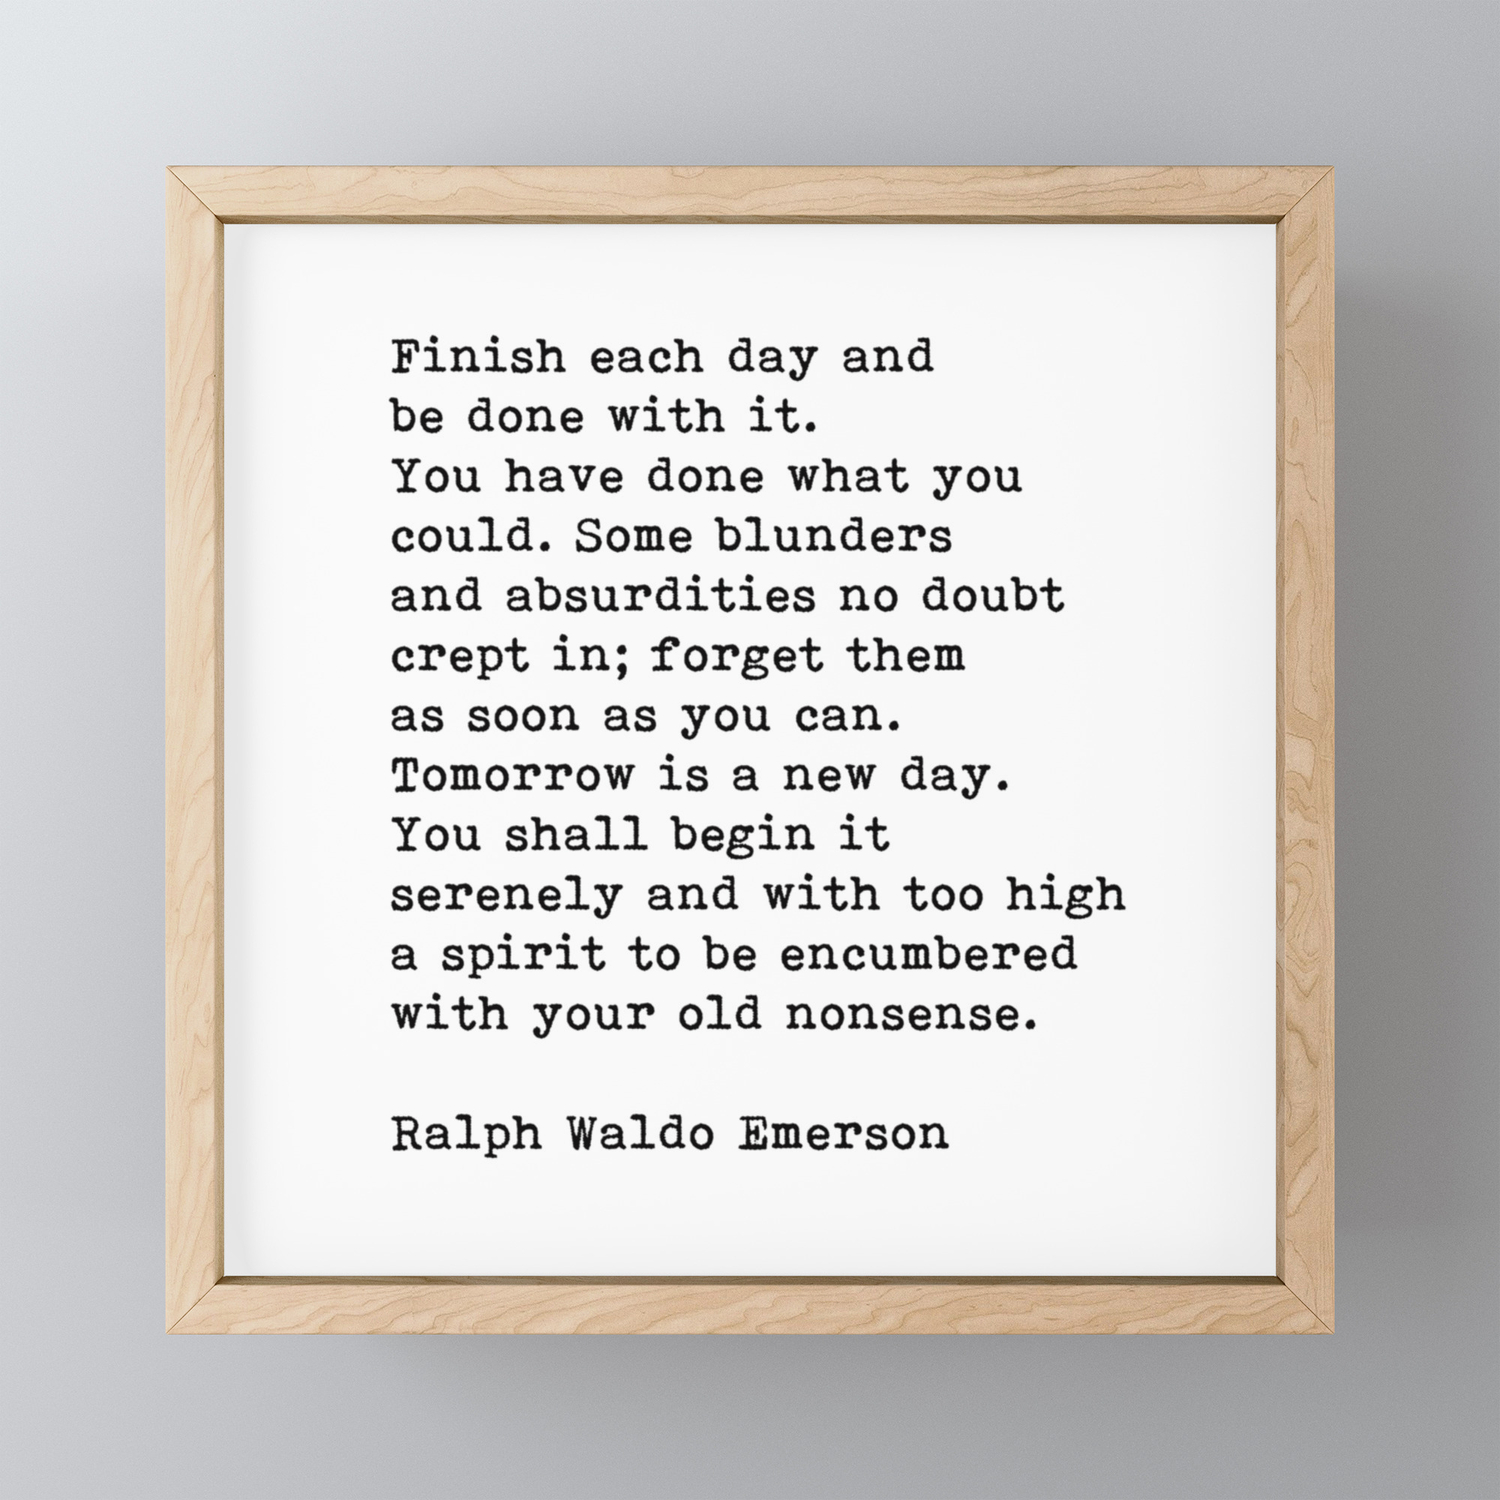 Ralph Waldo Emerson Finish Each Day Inspirational Quote Framed Mini Art Print By Theartshed Society6